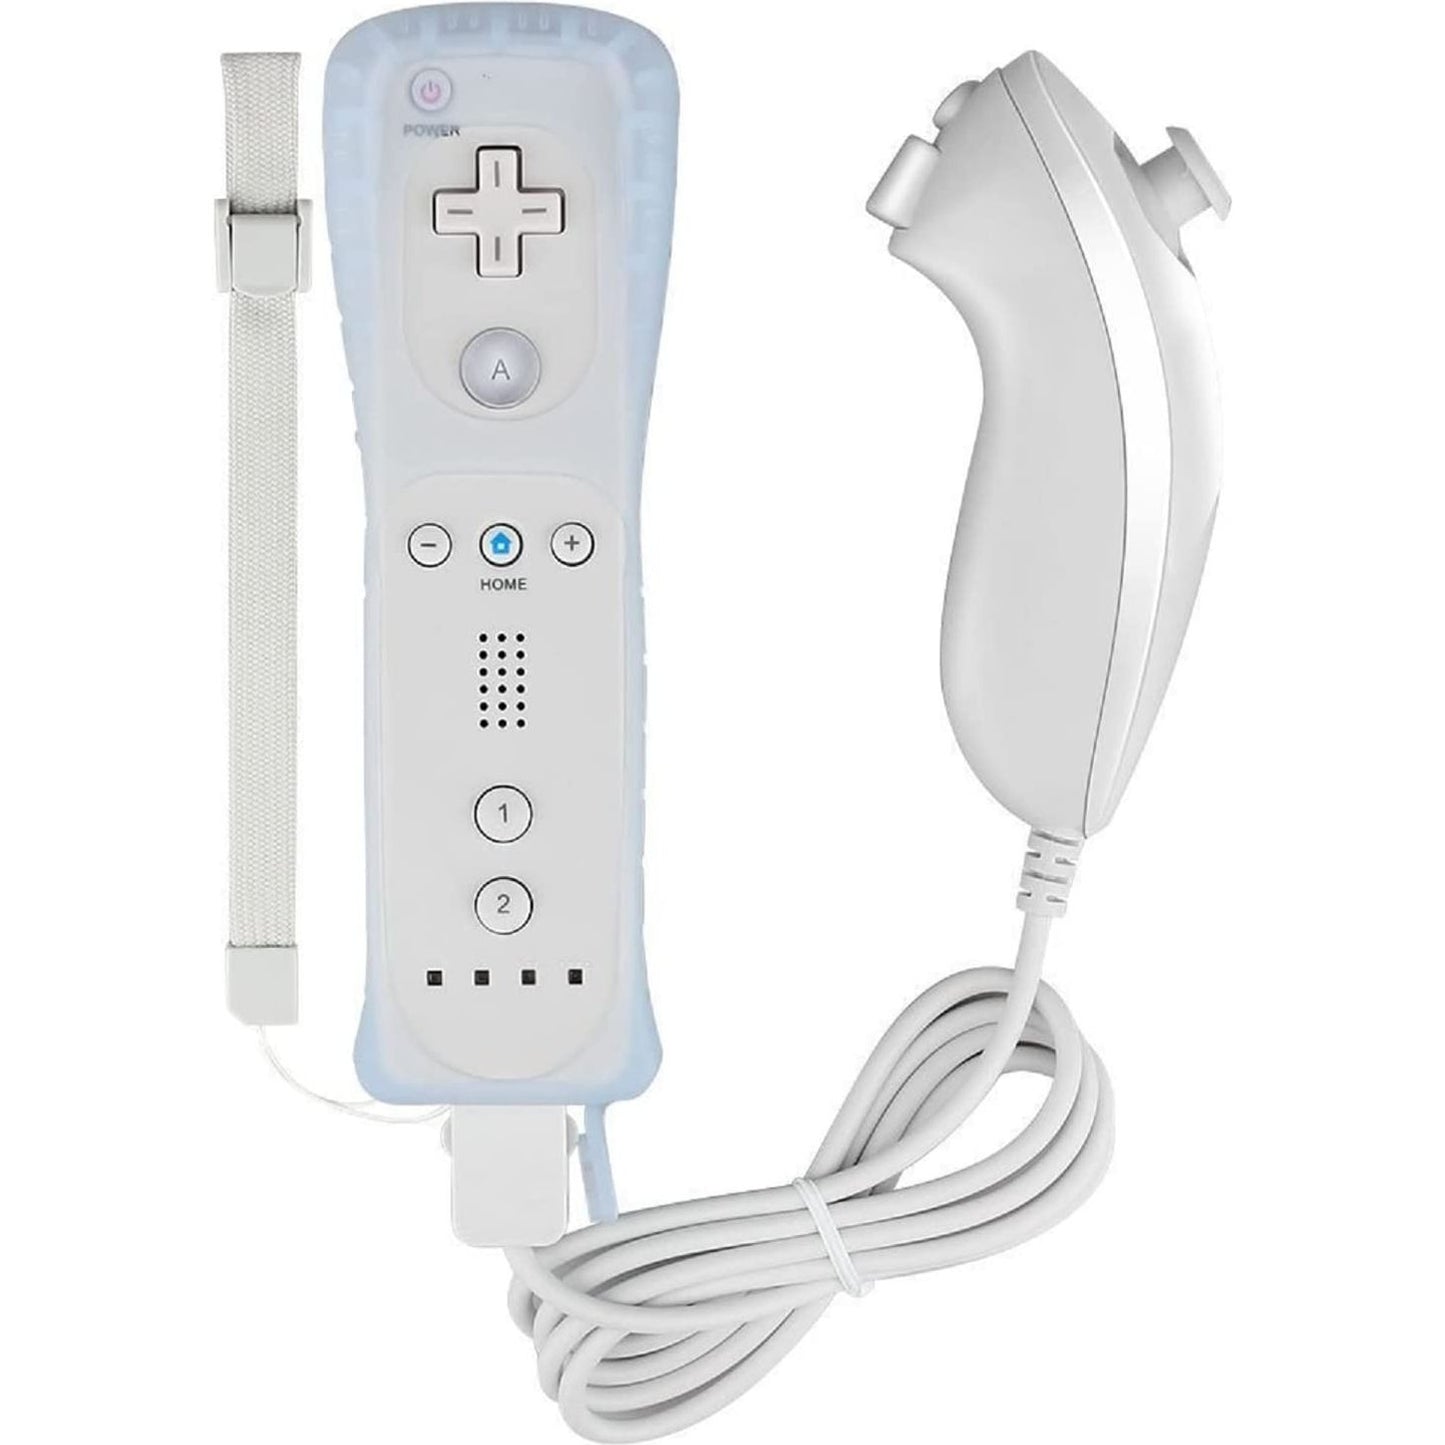 Nintendo Wii Console Bundle - White - Mario Kart - 2 Motion Plus Controllers from 2P Gaming